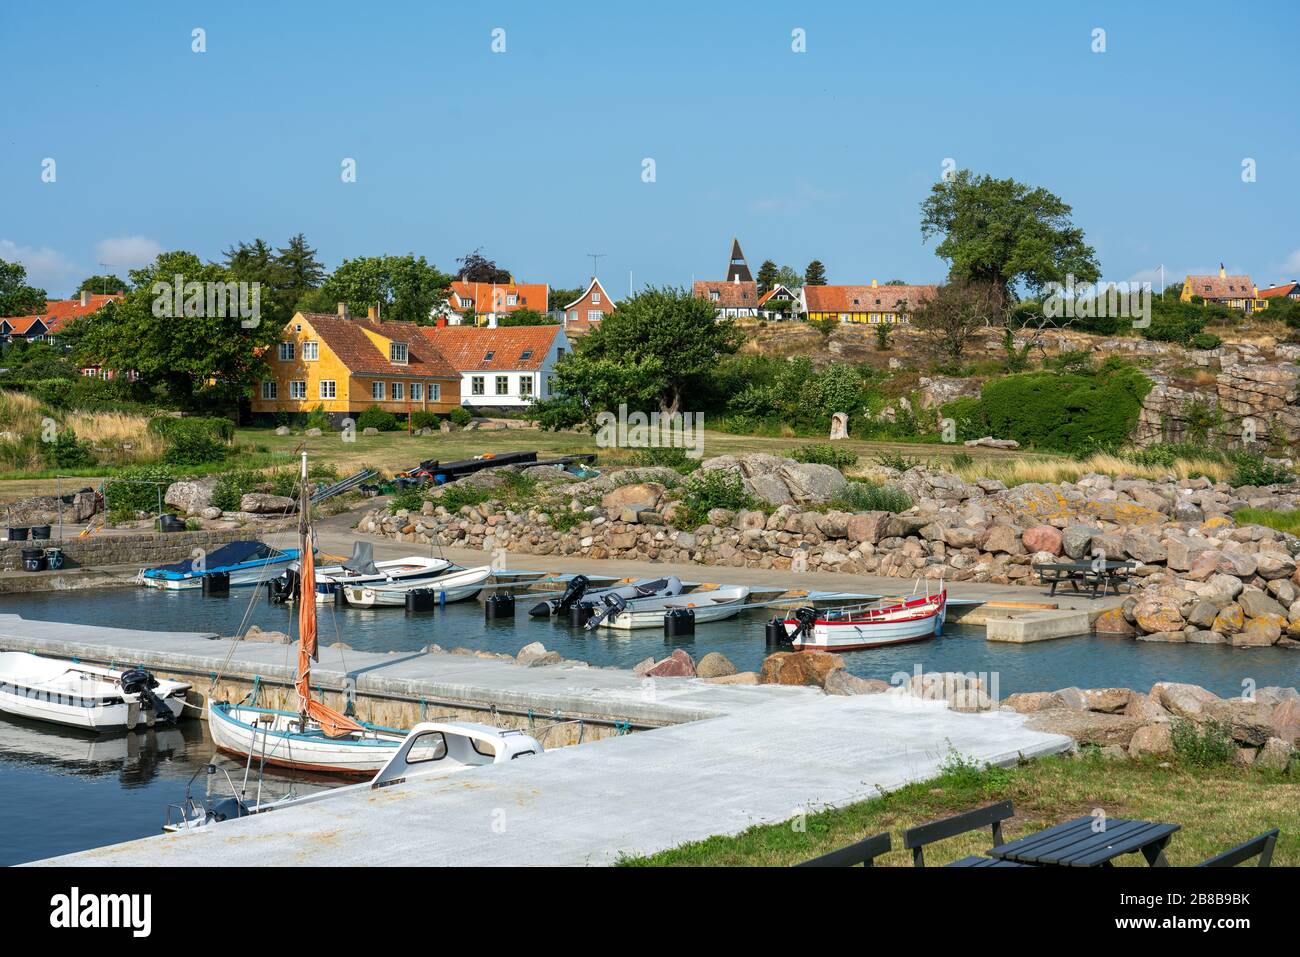 Svaneke, Bornholm / Denmark - July 29 2019: View over the Village Svanake in Bornholm with a small harbor in front Stock Photo